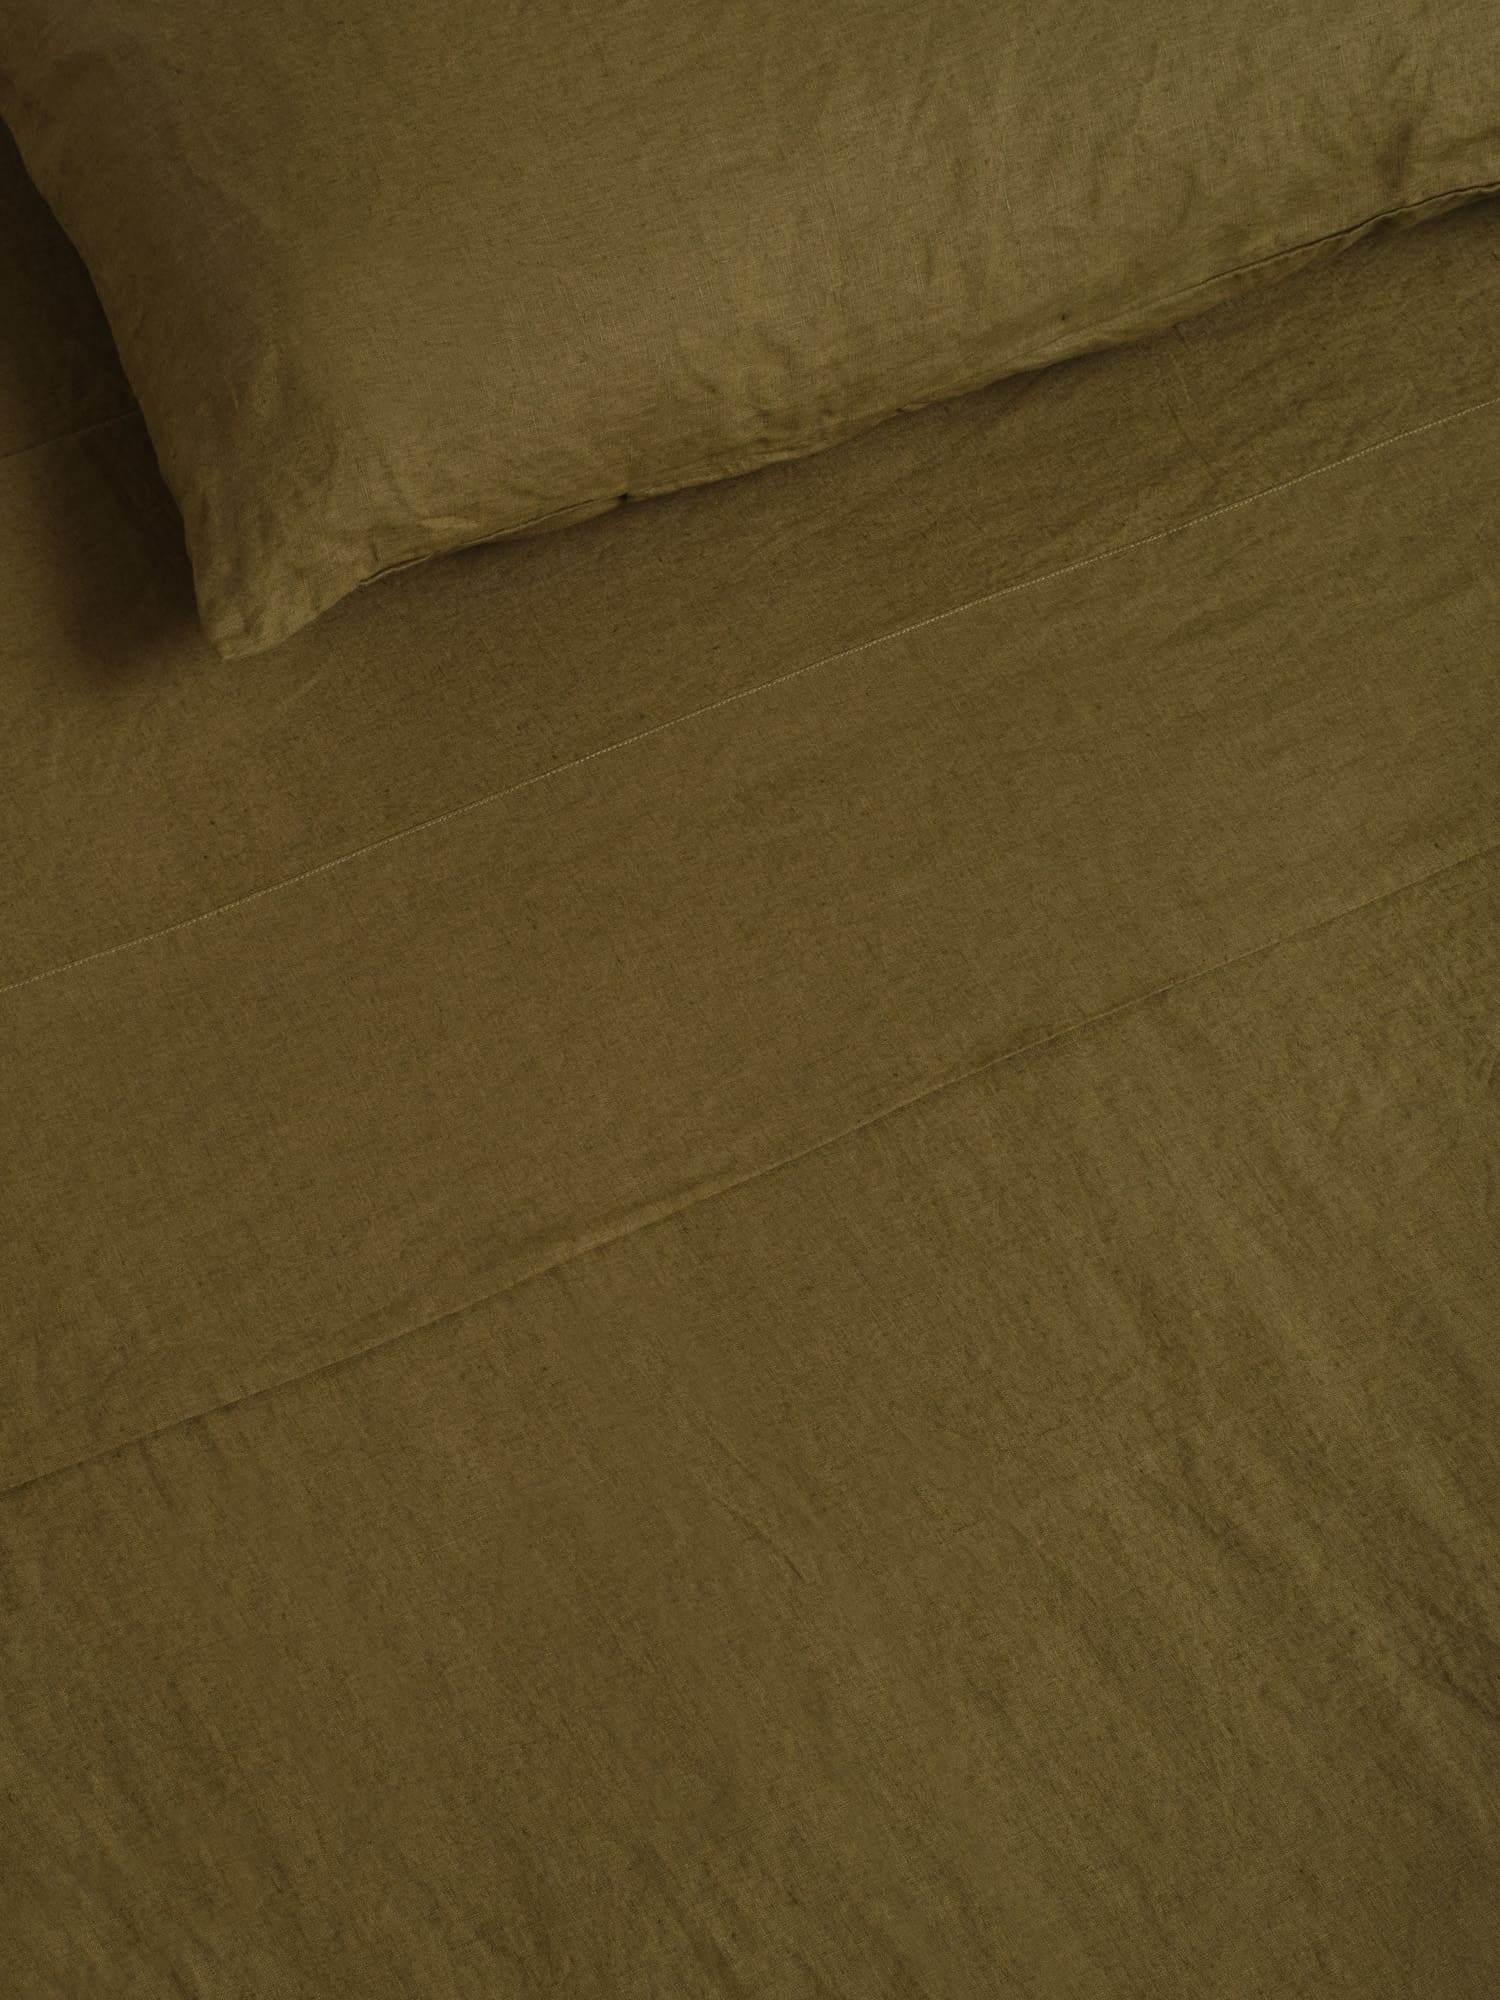 flat sheet in olive